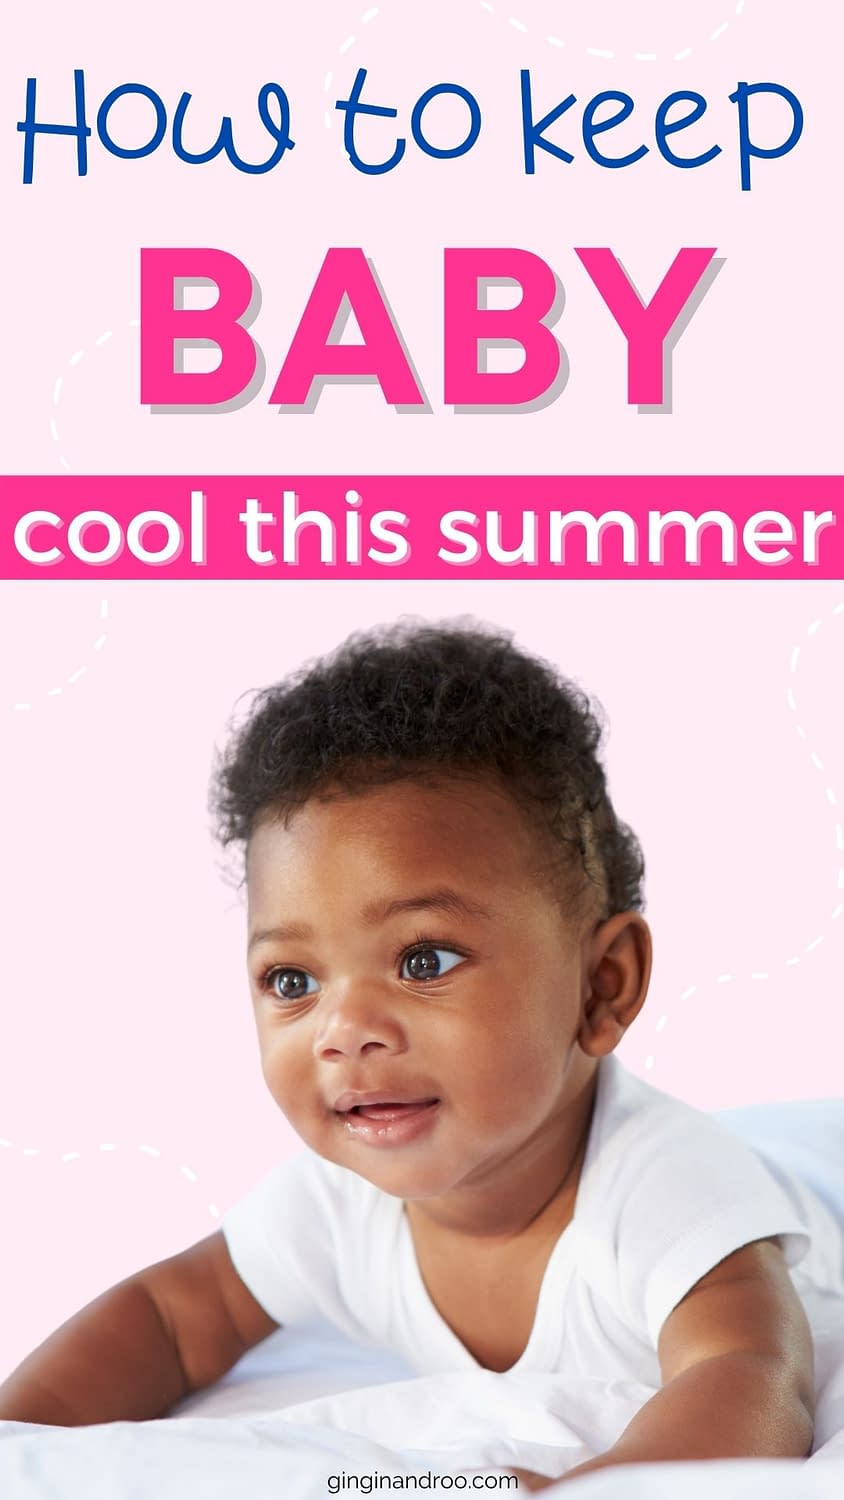 How to Keep Baby Cool in Summer - image of a baby with a cartoon sunshine